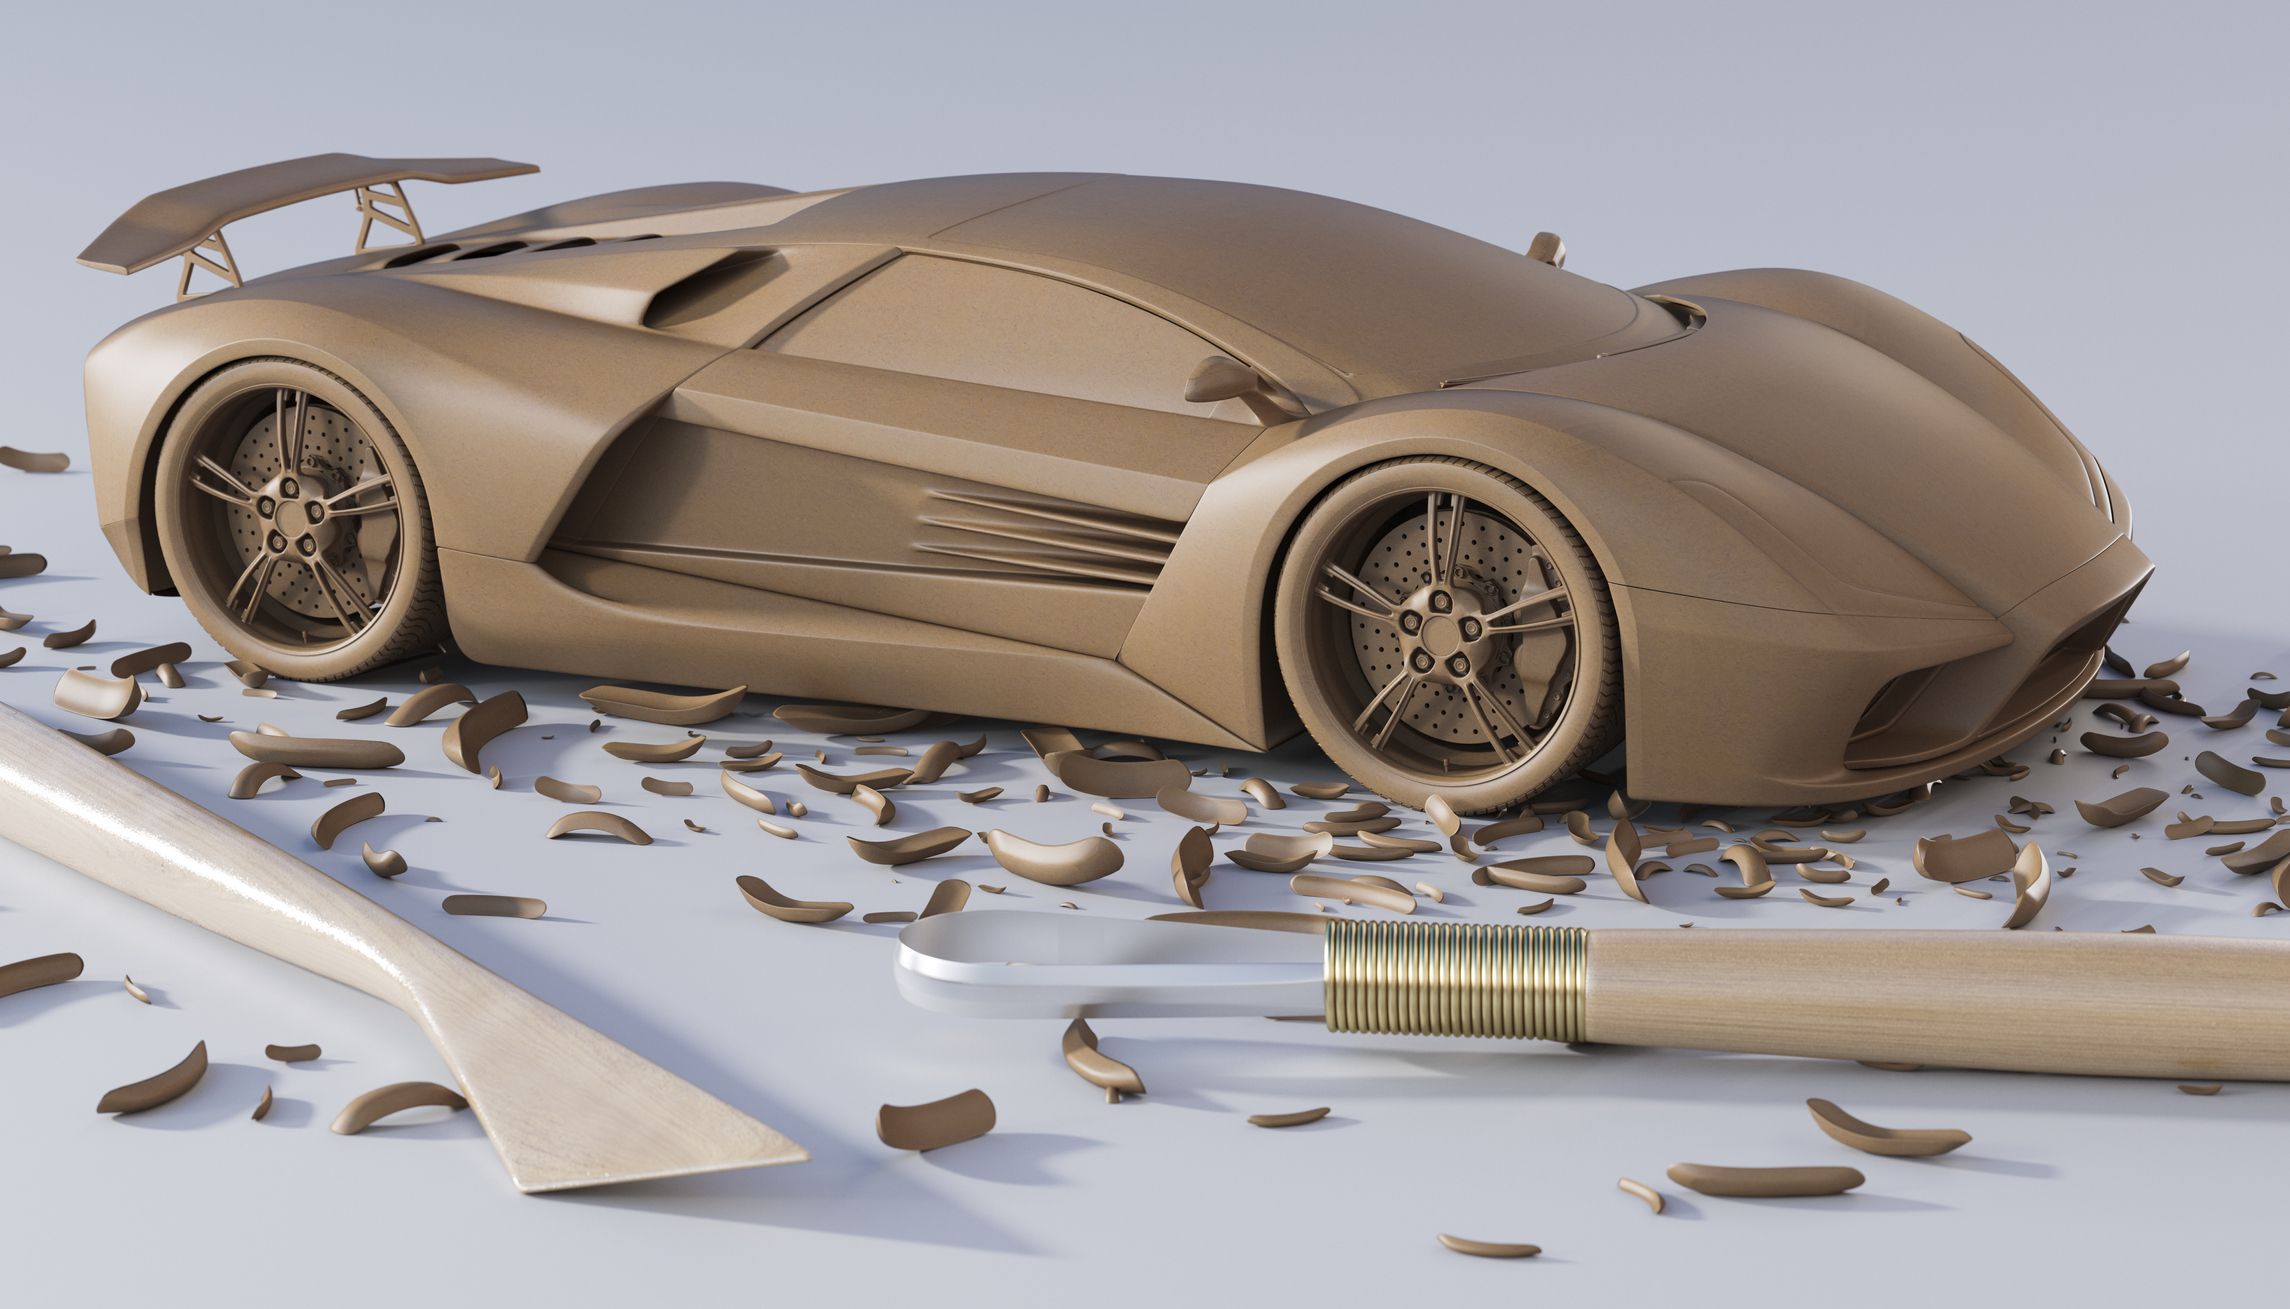 https://hips.hearstapps.com/hmg-prod/images/design-of-a-sculpted-car-with-sculpting-tools-royalty-free-image-1584895346.jpg